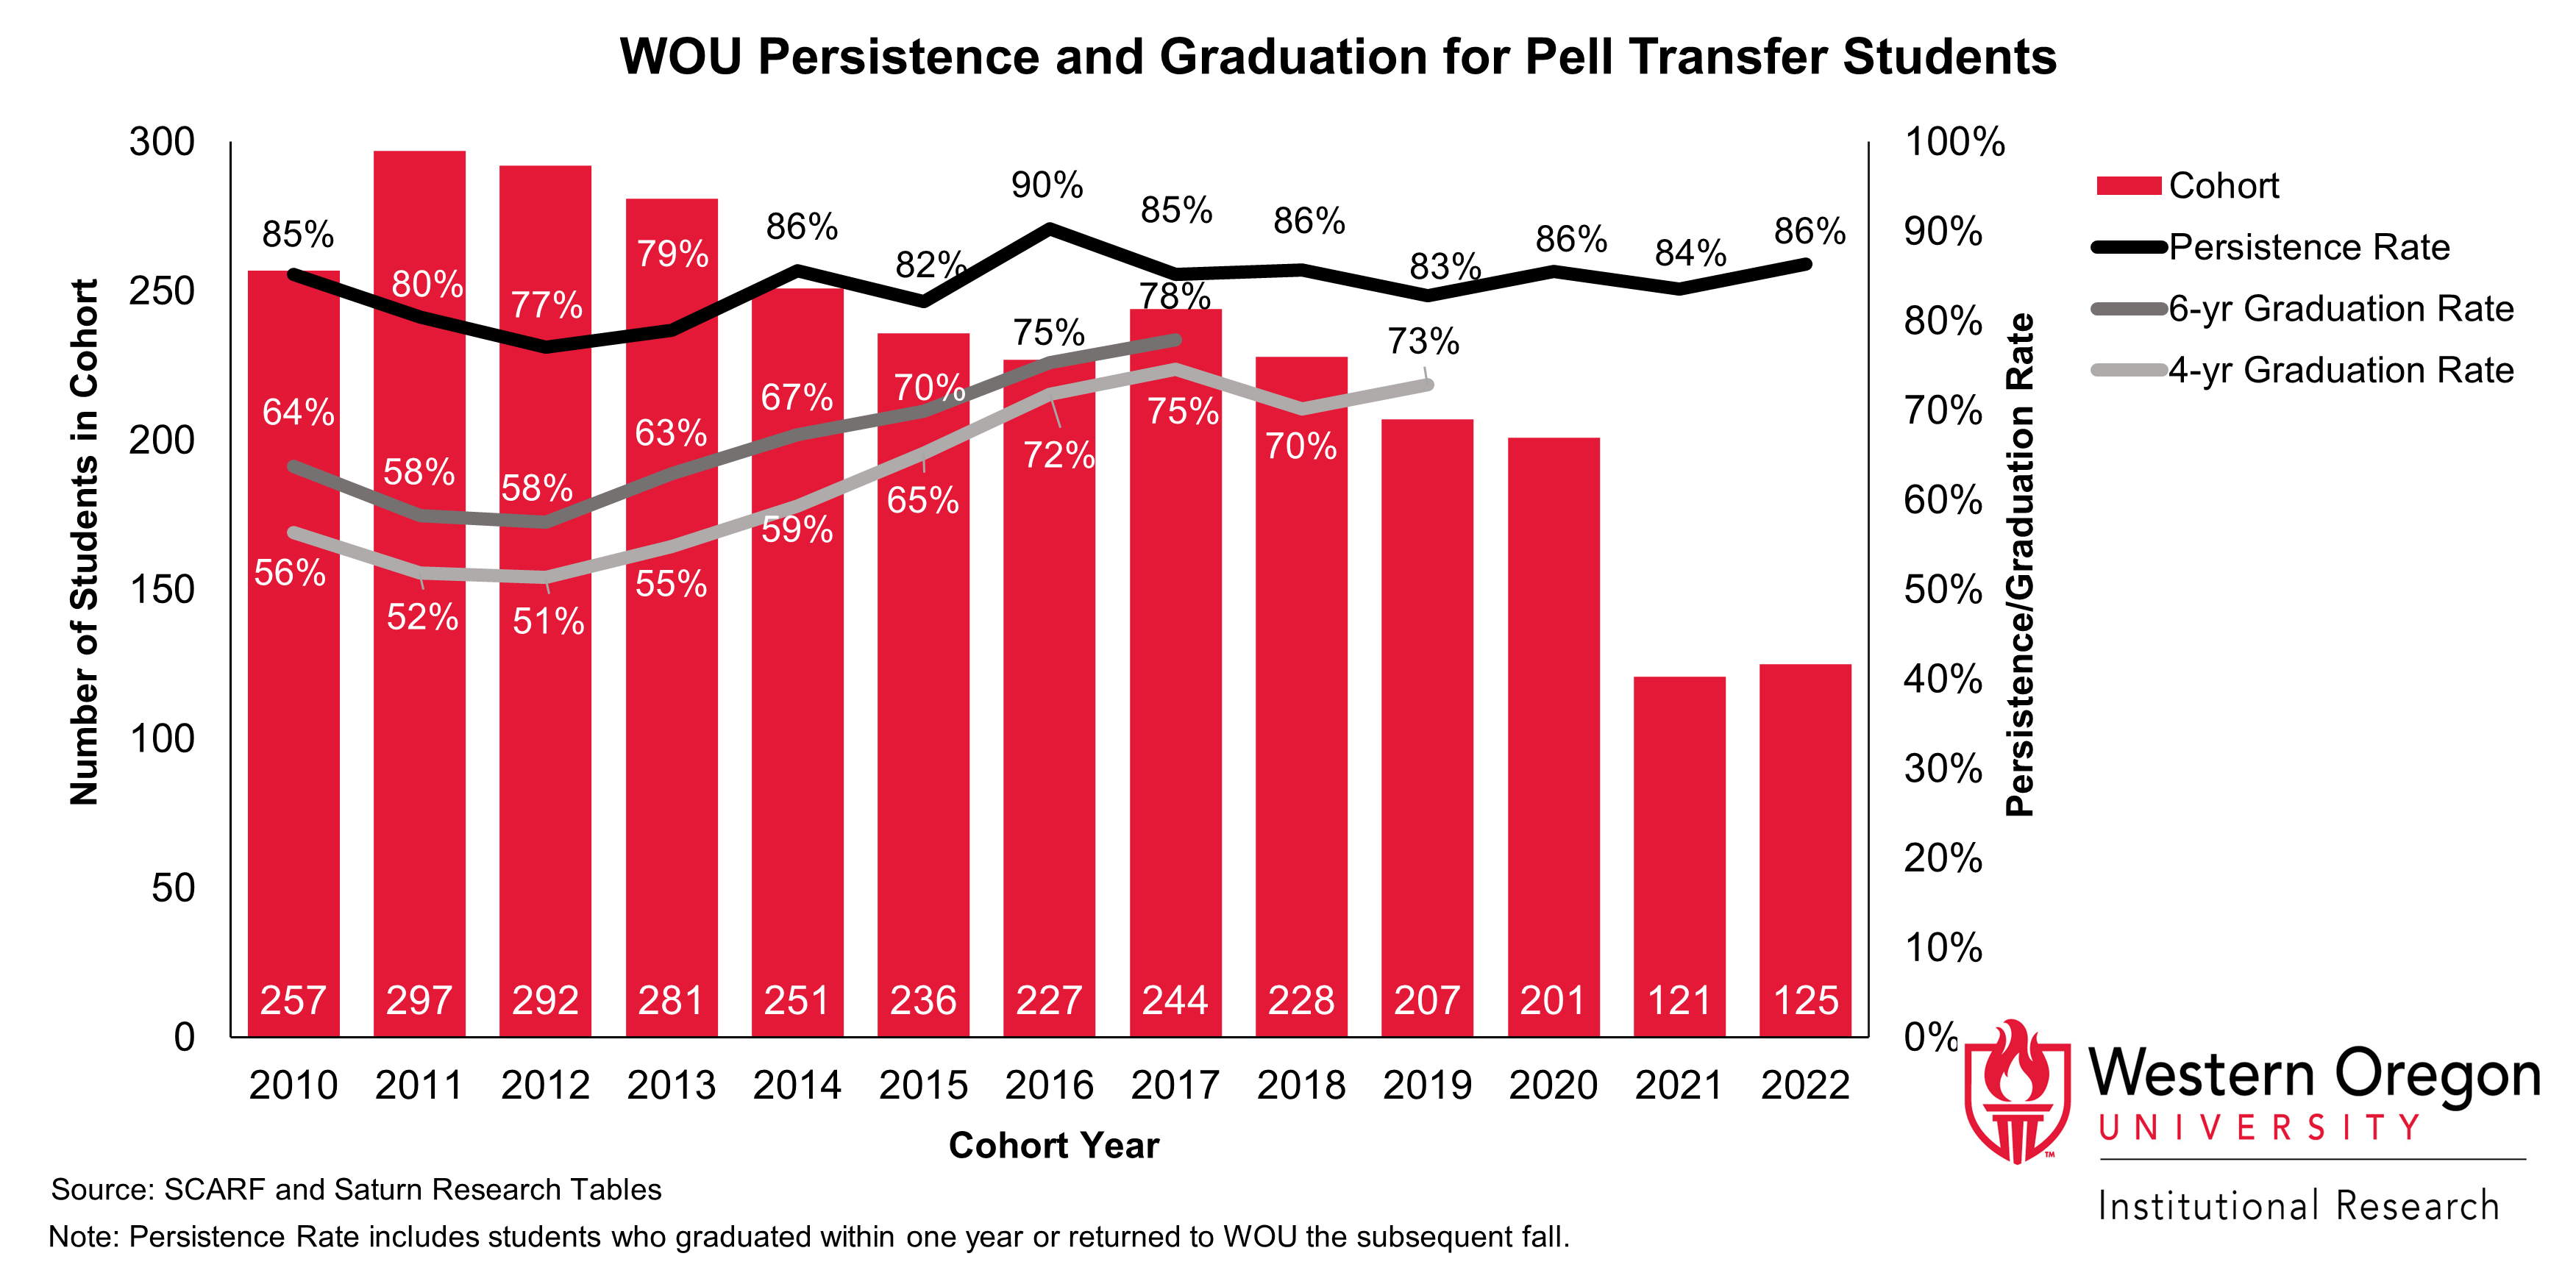 Bar and line graph of retention and 4- and 6-year graduation rates since 2010 for WOU transfer students that are Pell recipients, showing that graduation rates have been steadily increasing while persistance rates have remained largely stable.